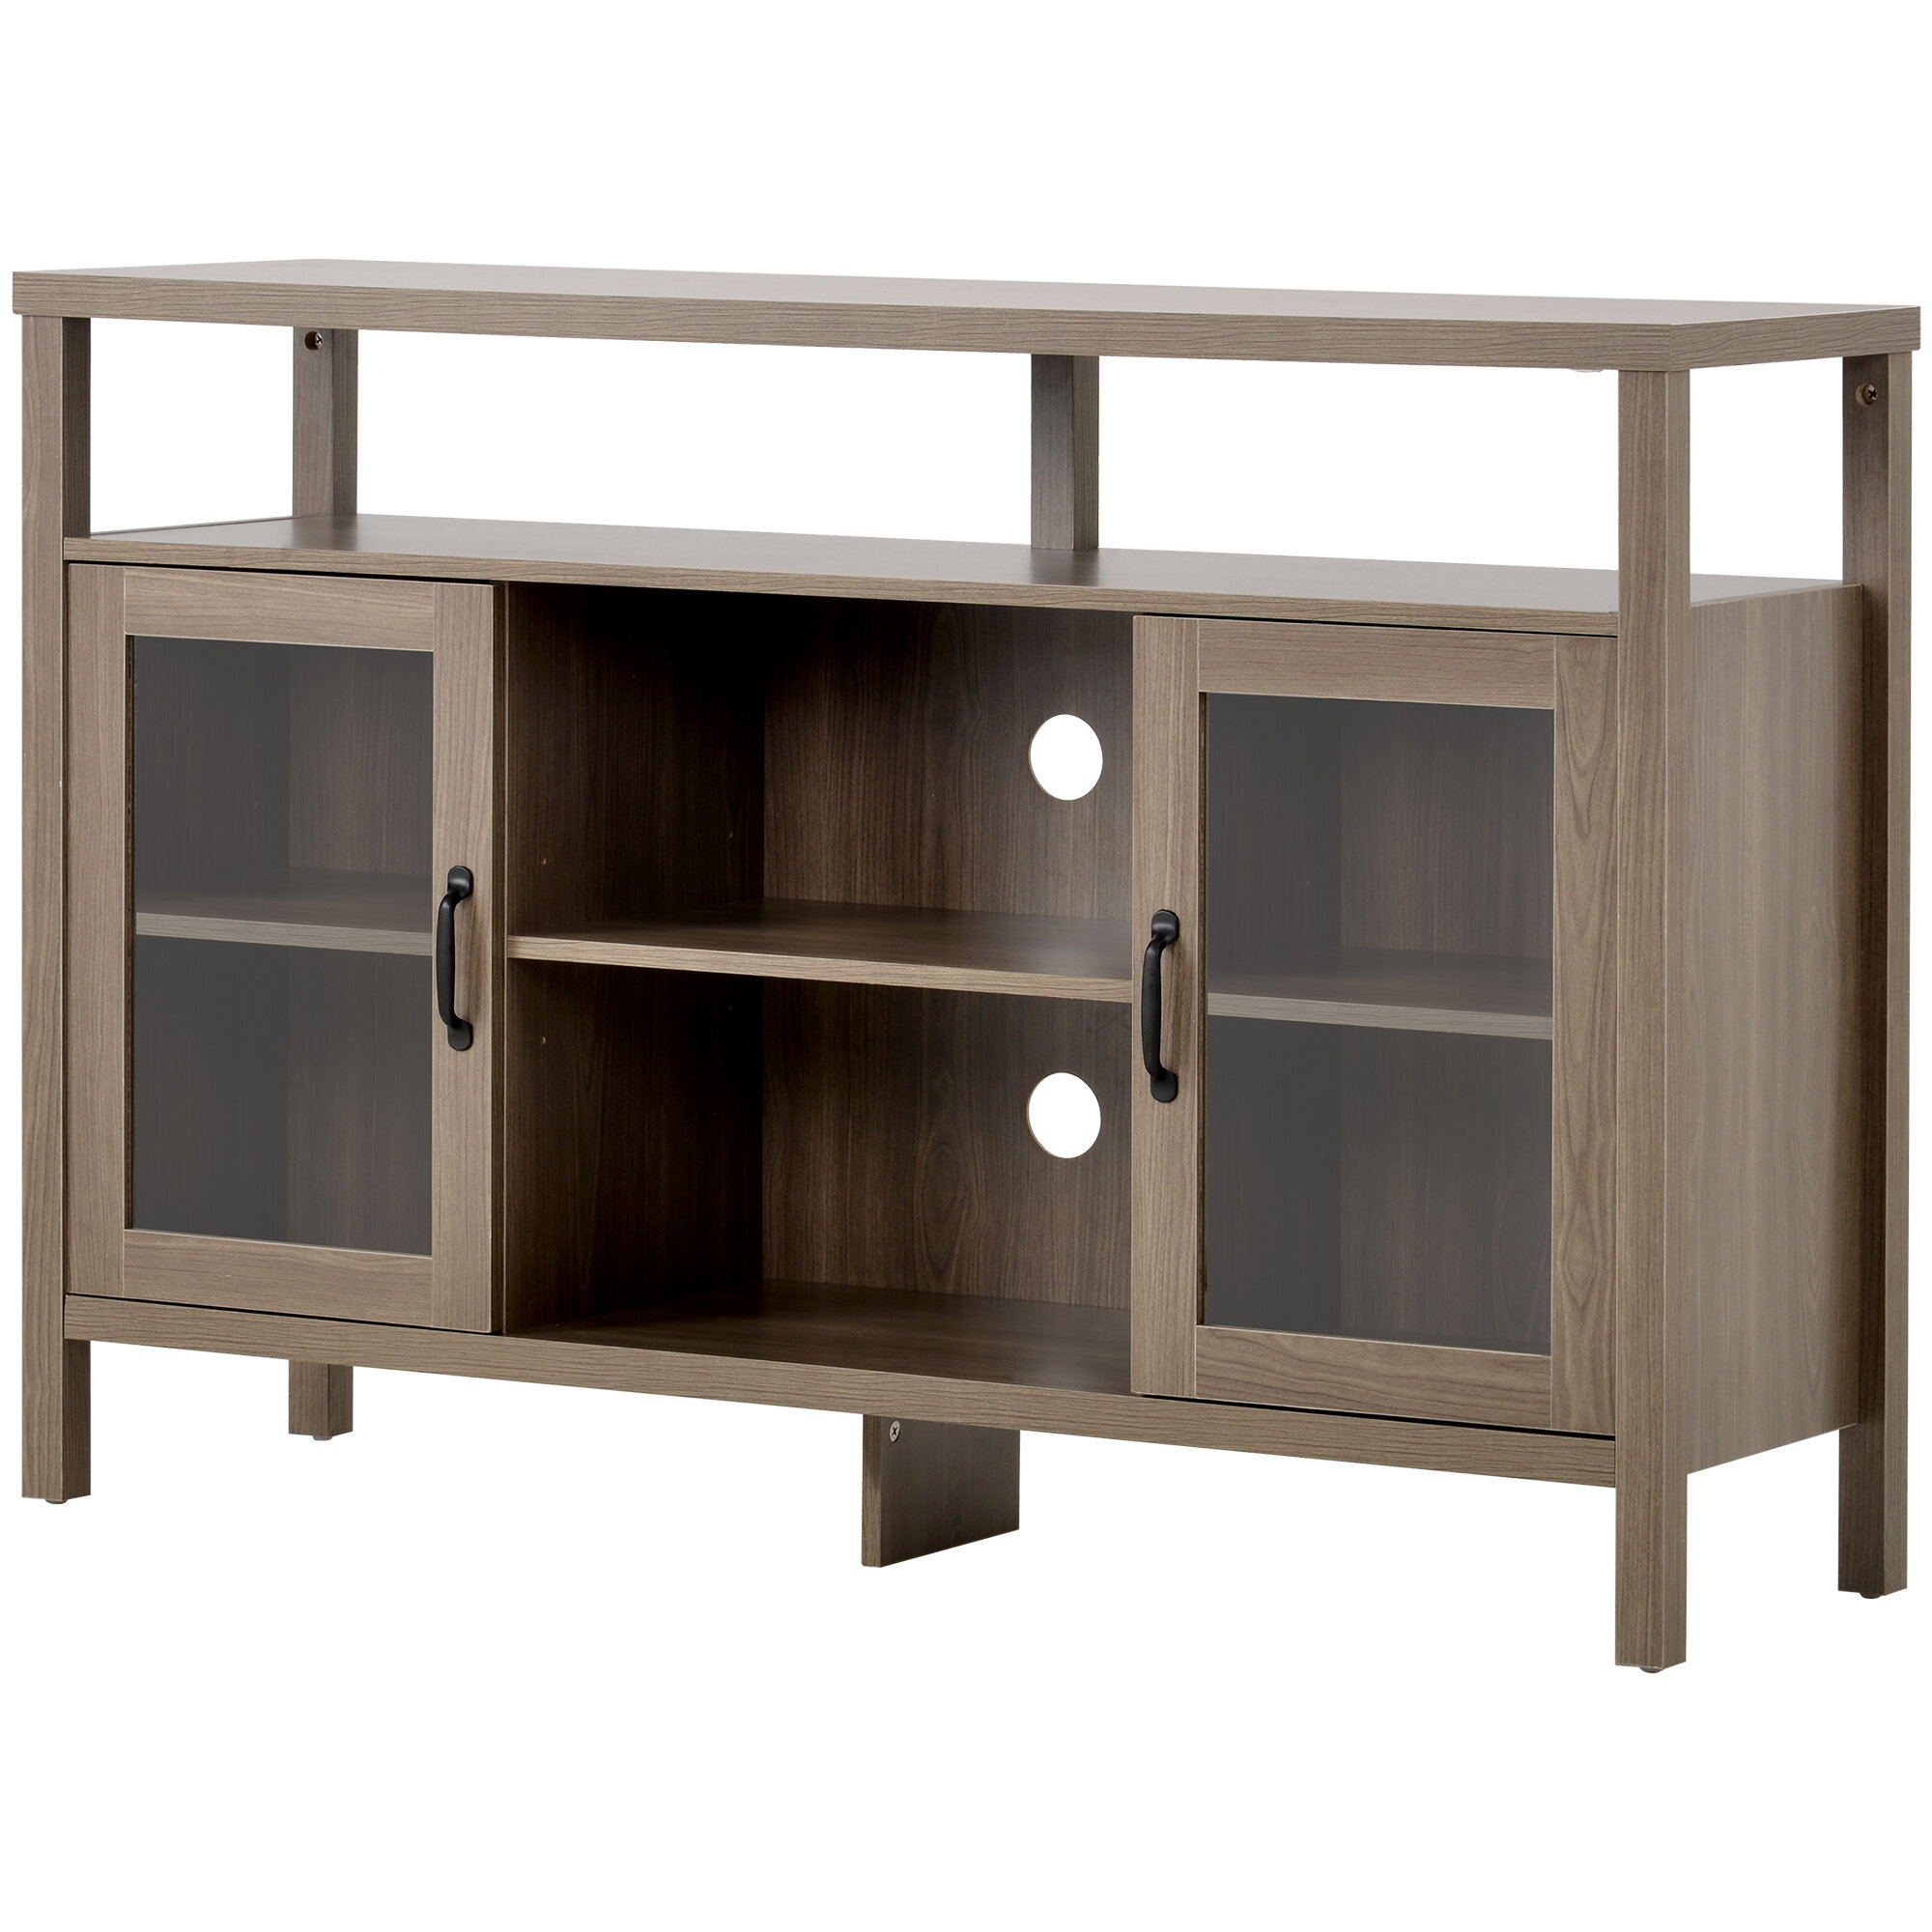 Details about   Rustic TV Stand Entertainment Center Farmhouse Console Storage Two Cabinet Doors